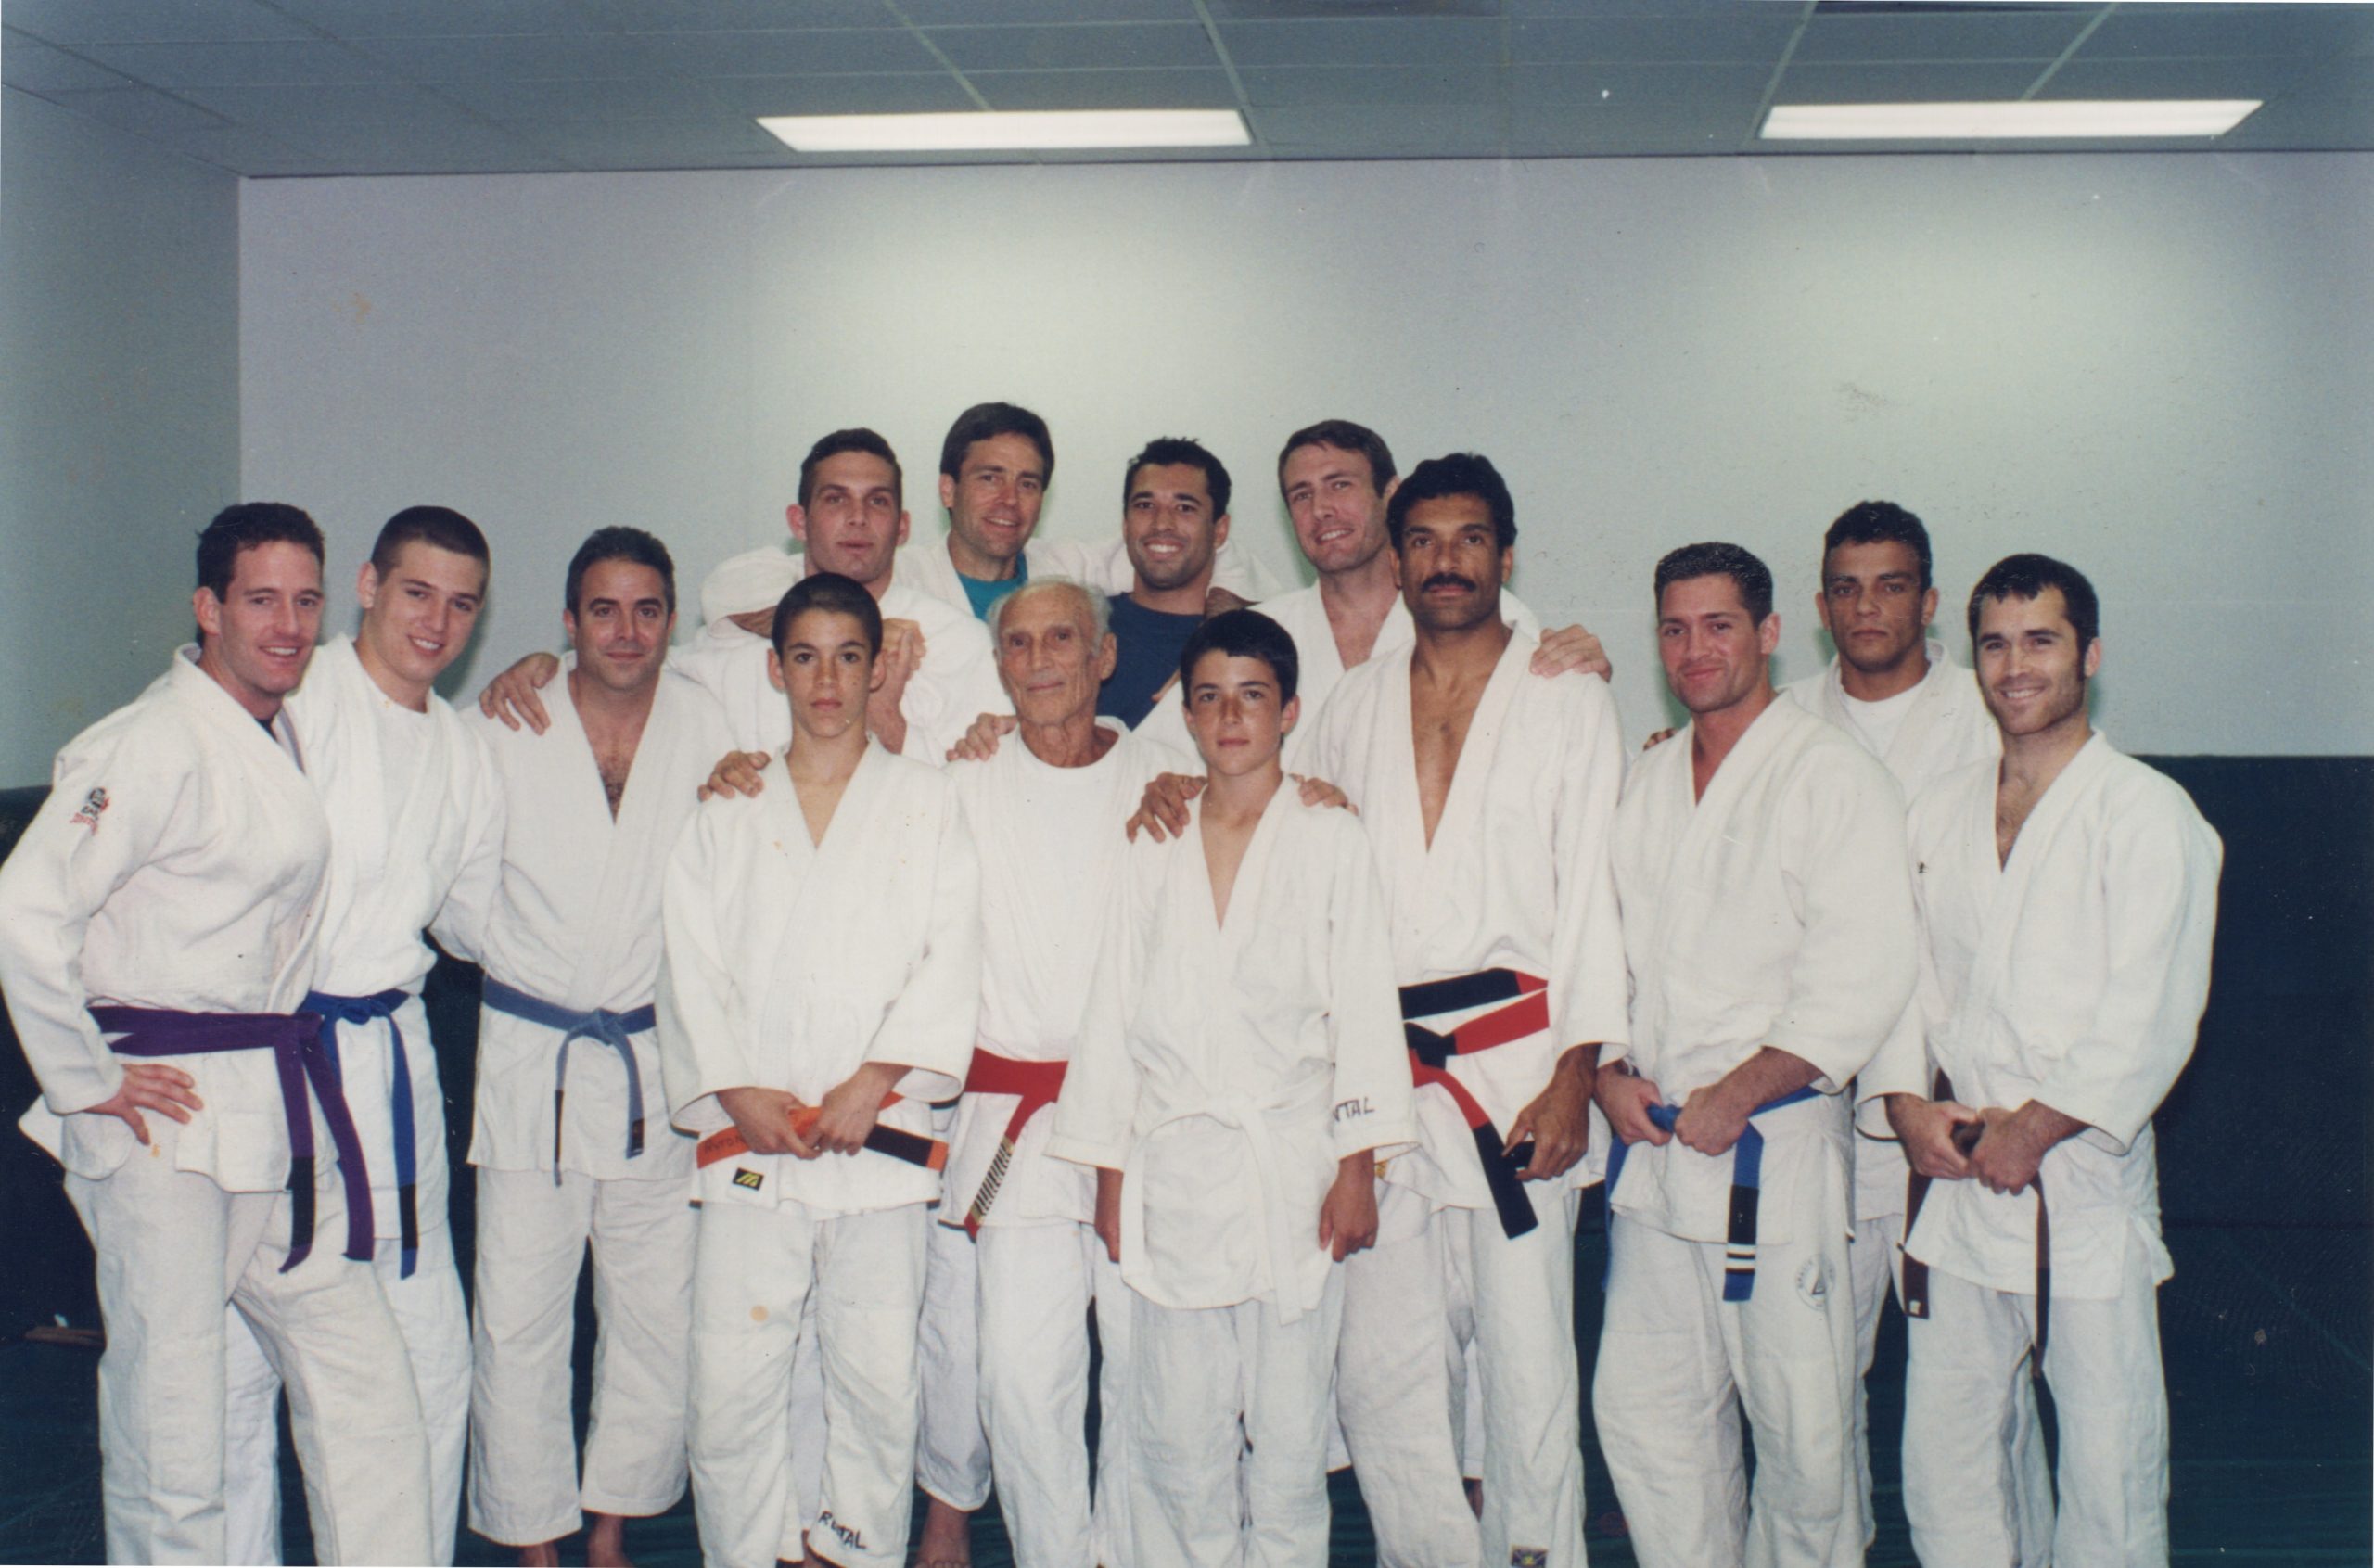 Gracie Family & Wrestling, Cross Training Throughout History